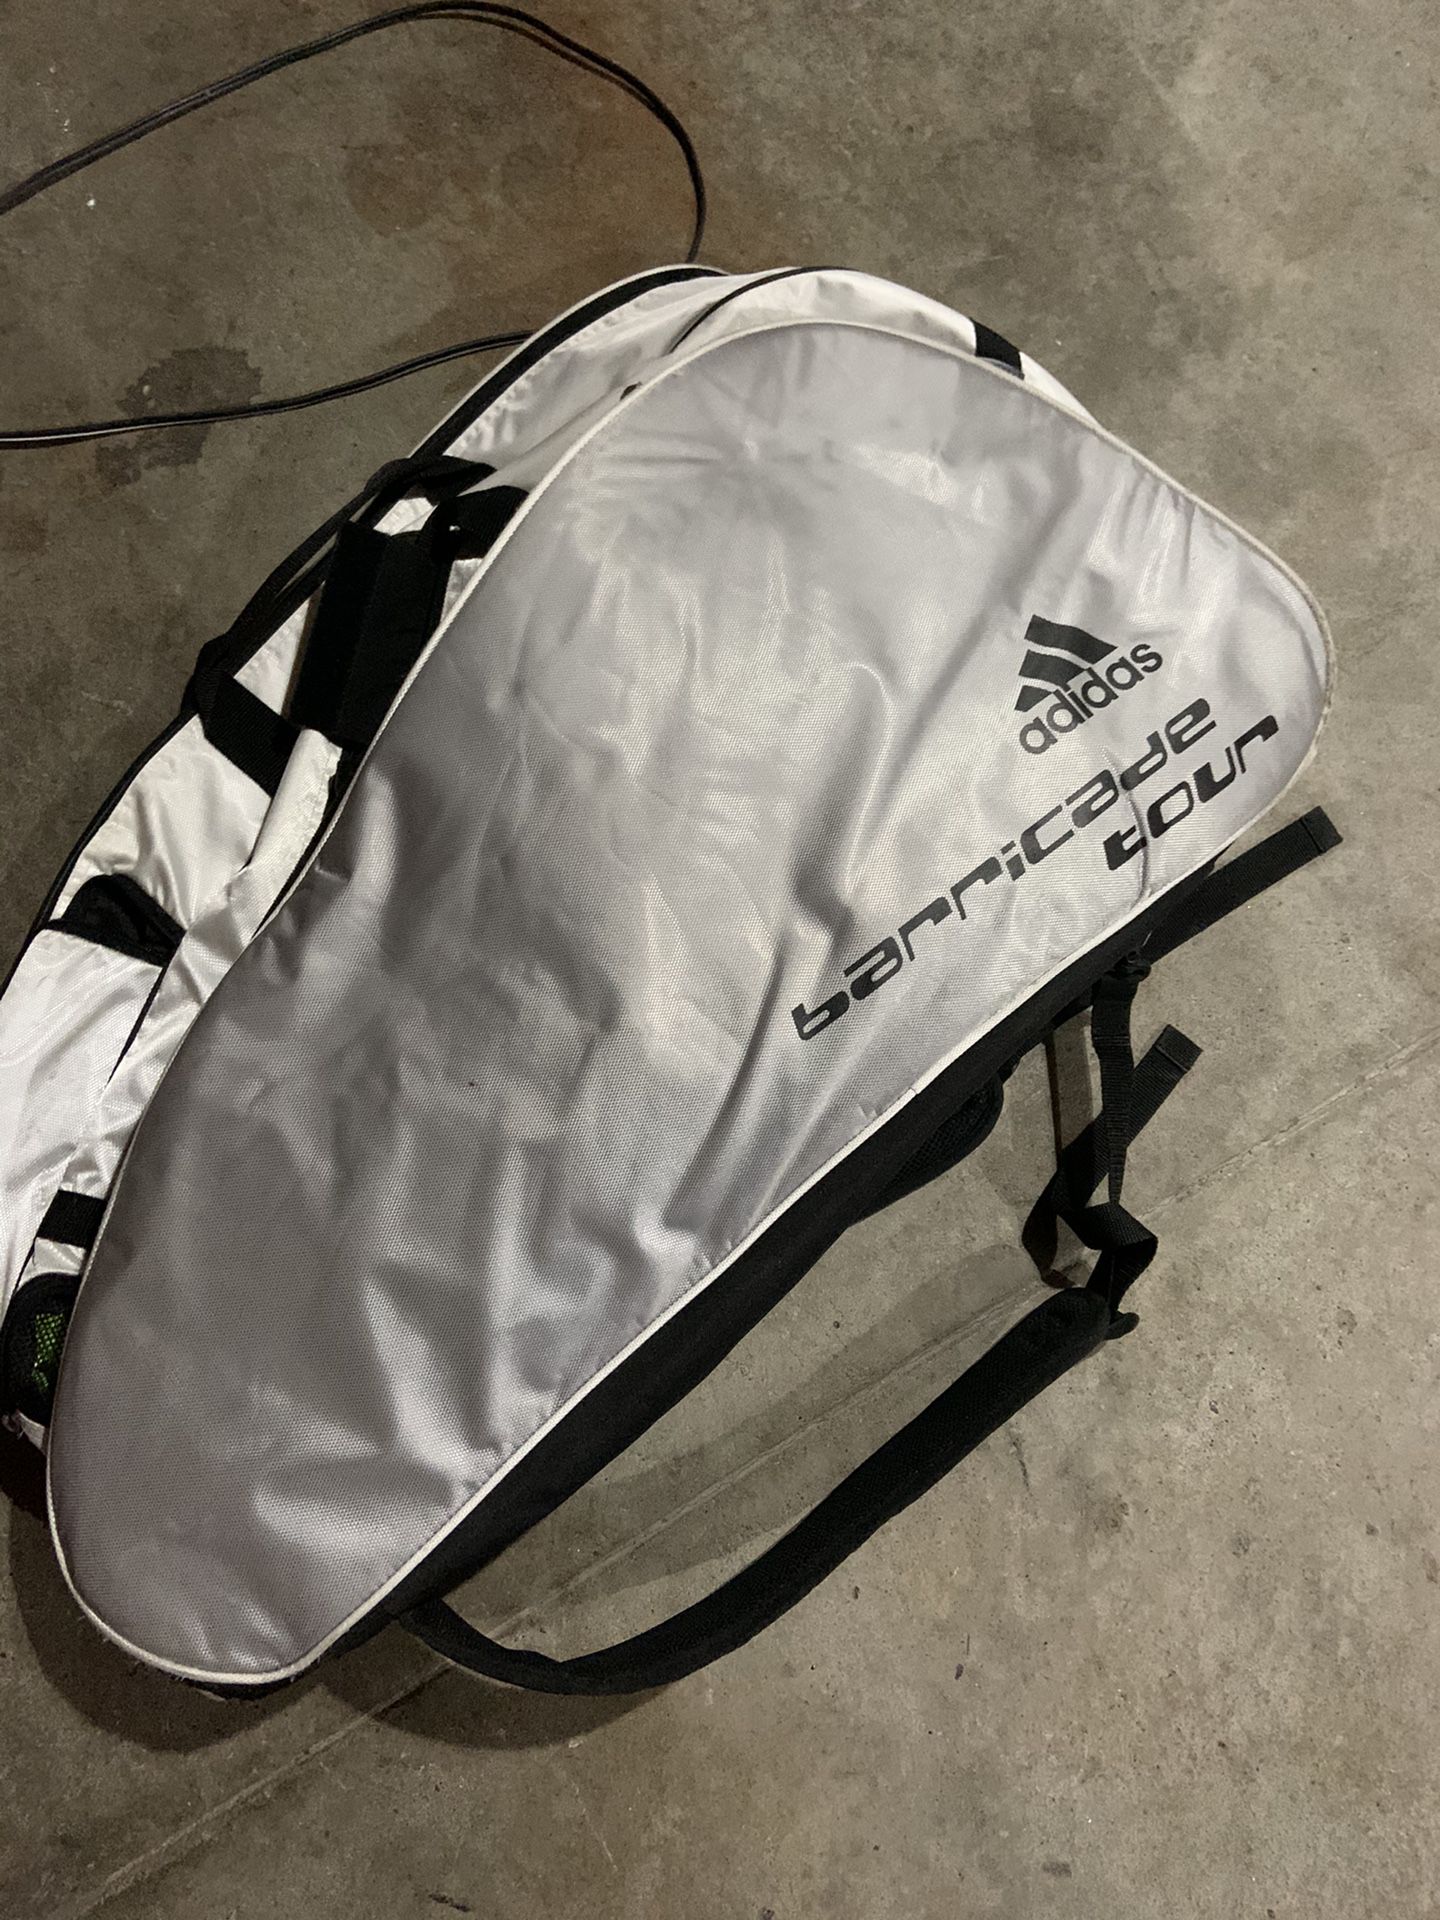 Pre loved msrp $140Addidas limited edition barricade tour bag 9-12 tennis rackets